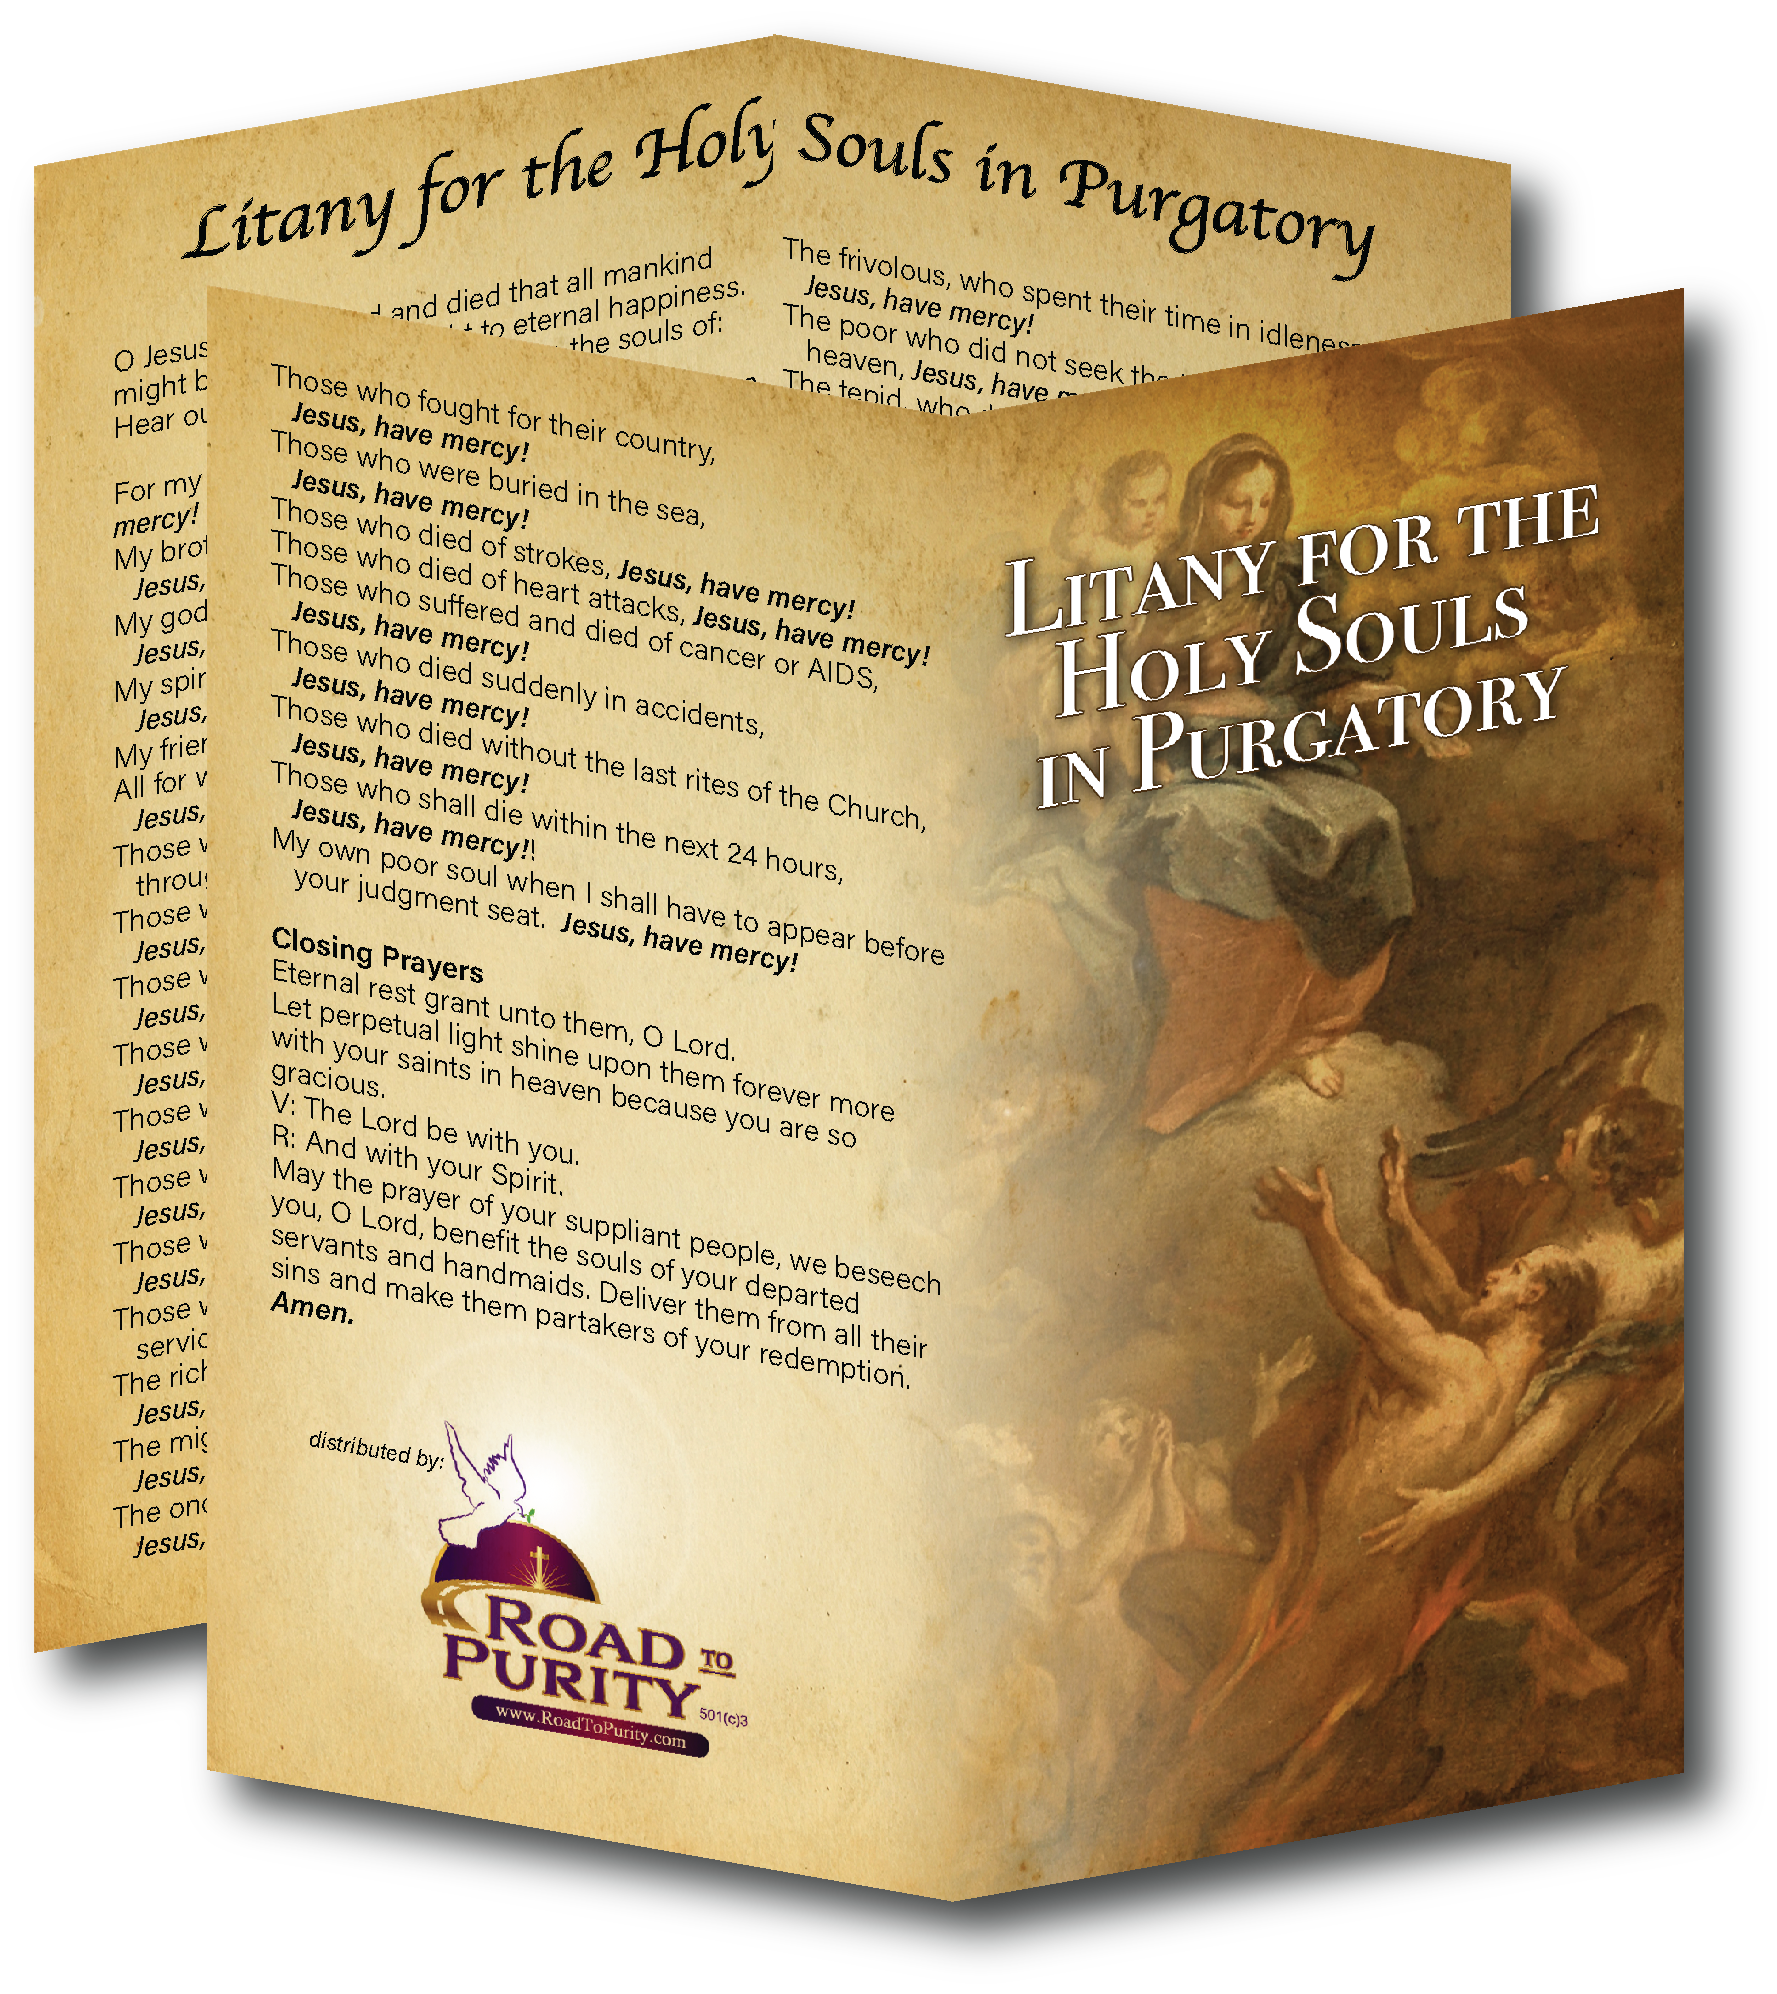 NEW! Litany for Holy Souls in Purgatory  - Prayer Card / 3" x 6" folded